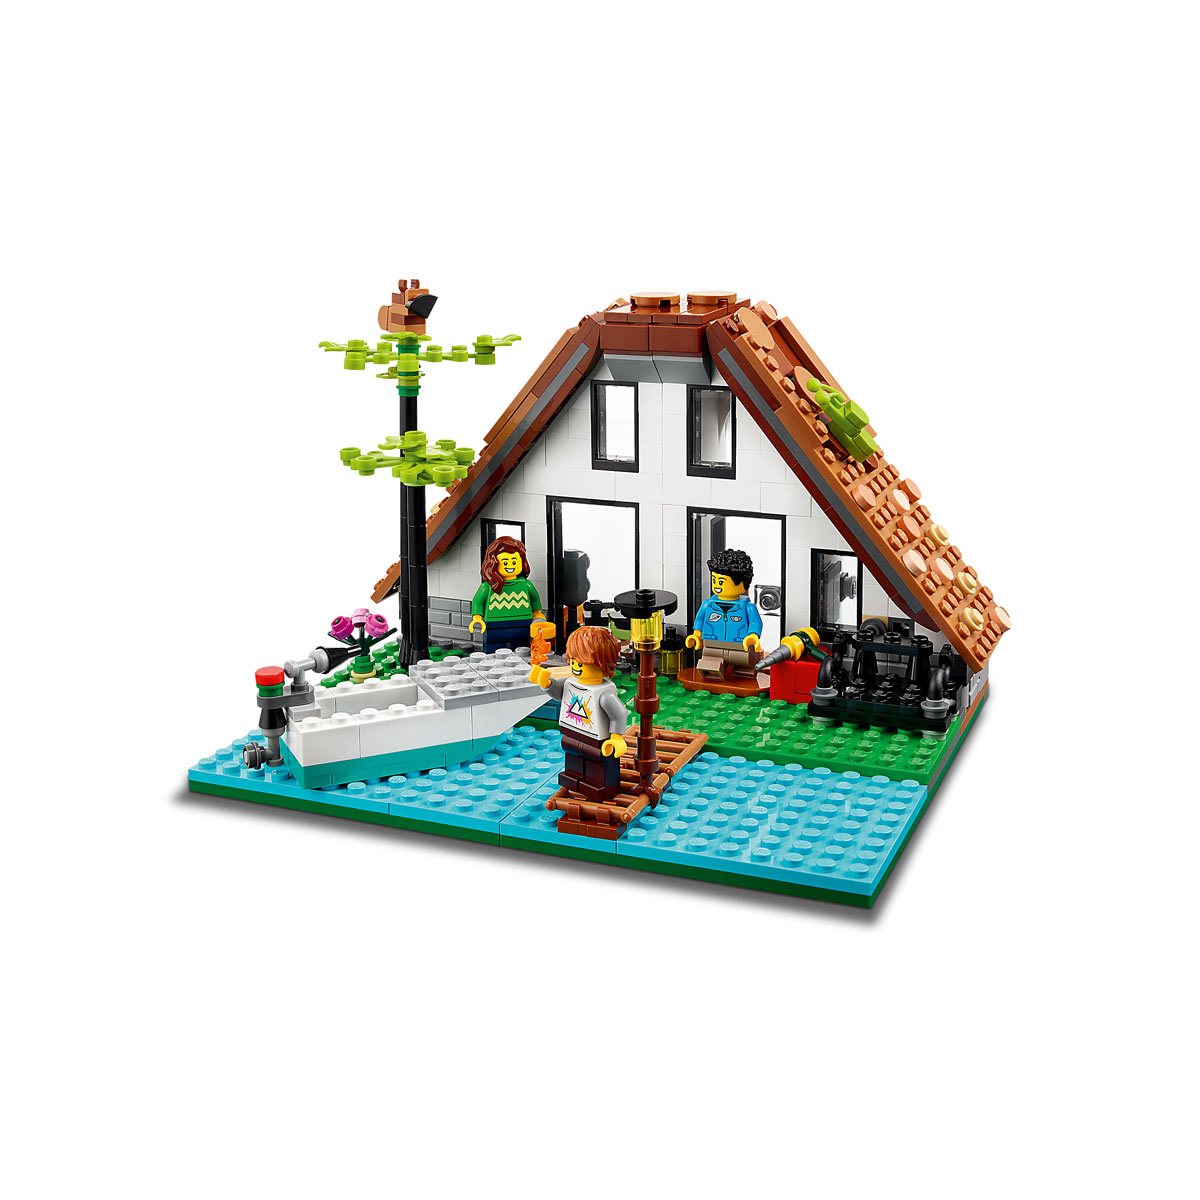 LEGO Creator 3-in-1 31139 Cozy House [Hands On Review]